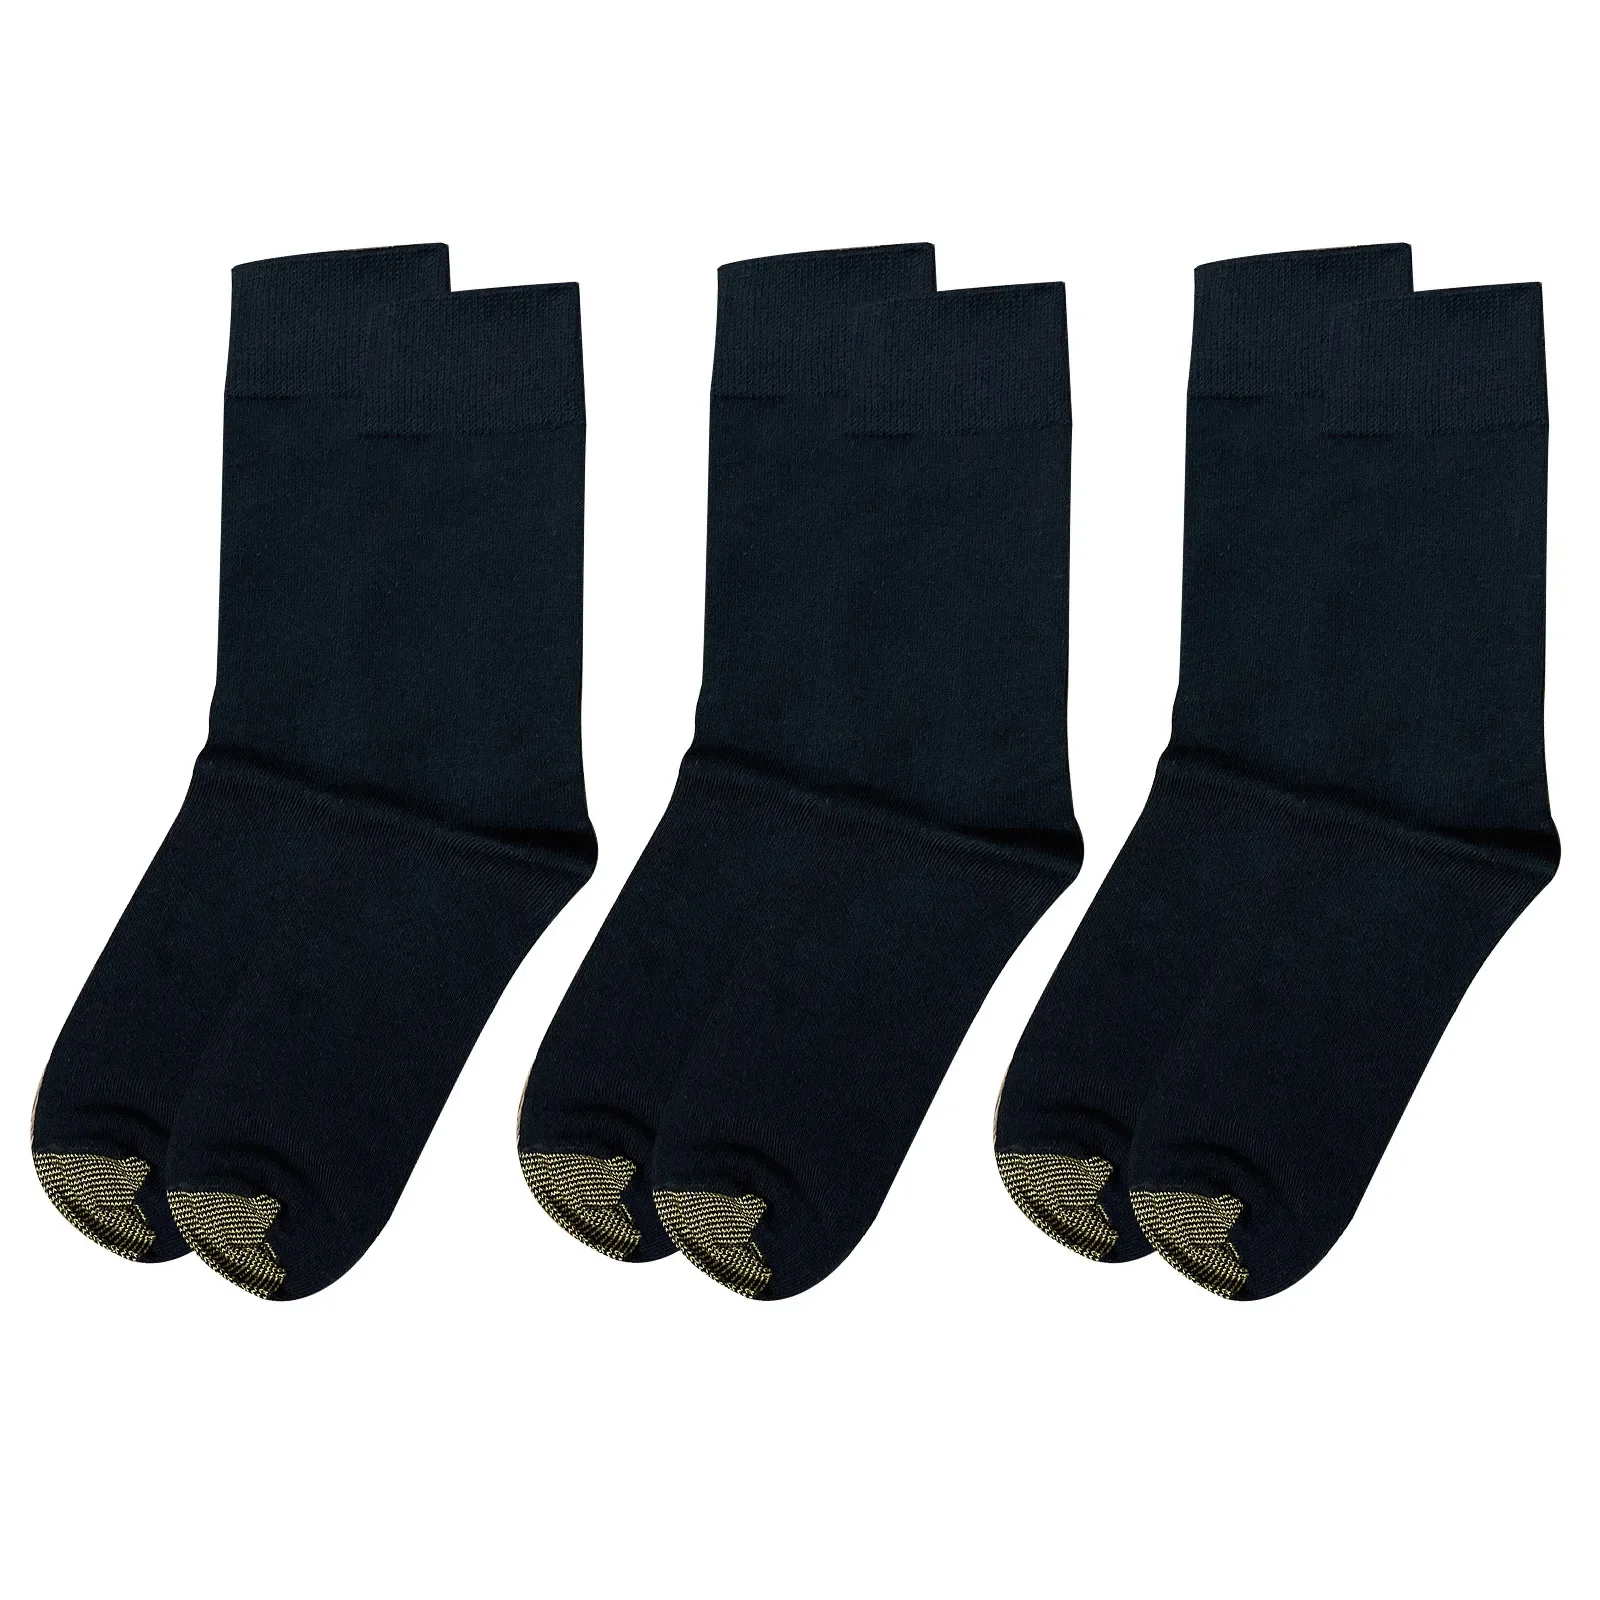 CLEVER-MENMODE 3 x Cotton Socks Men Formal Tube Sock Business Male hombre Sports Casual Soft Fashion Comfortable clever зодиаки рак